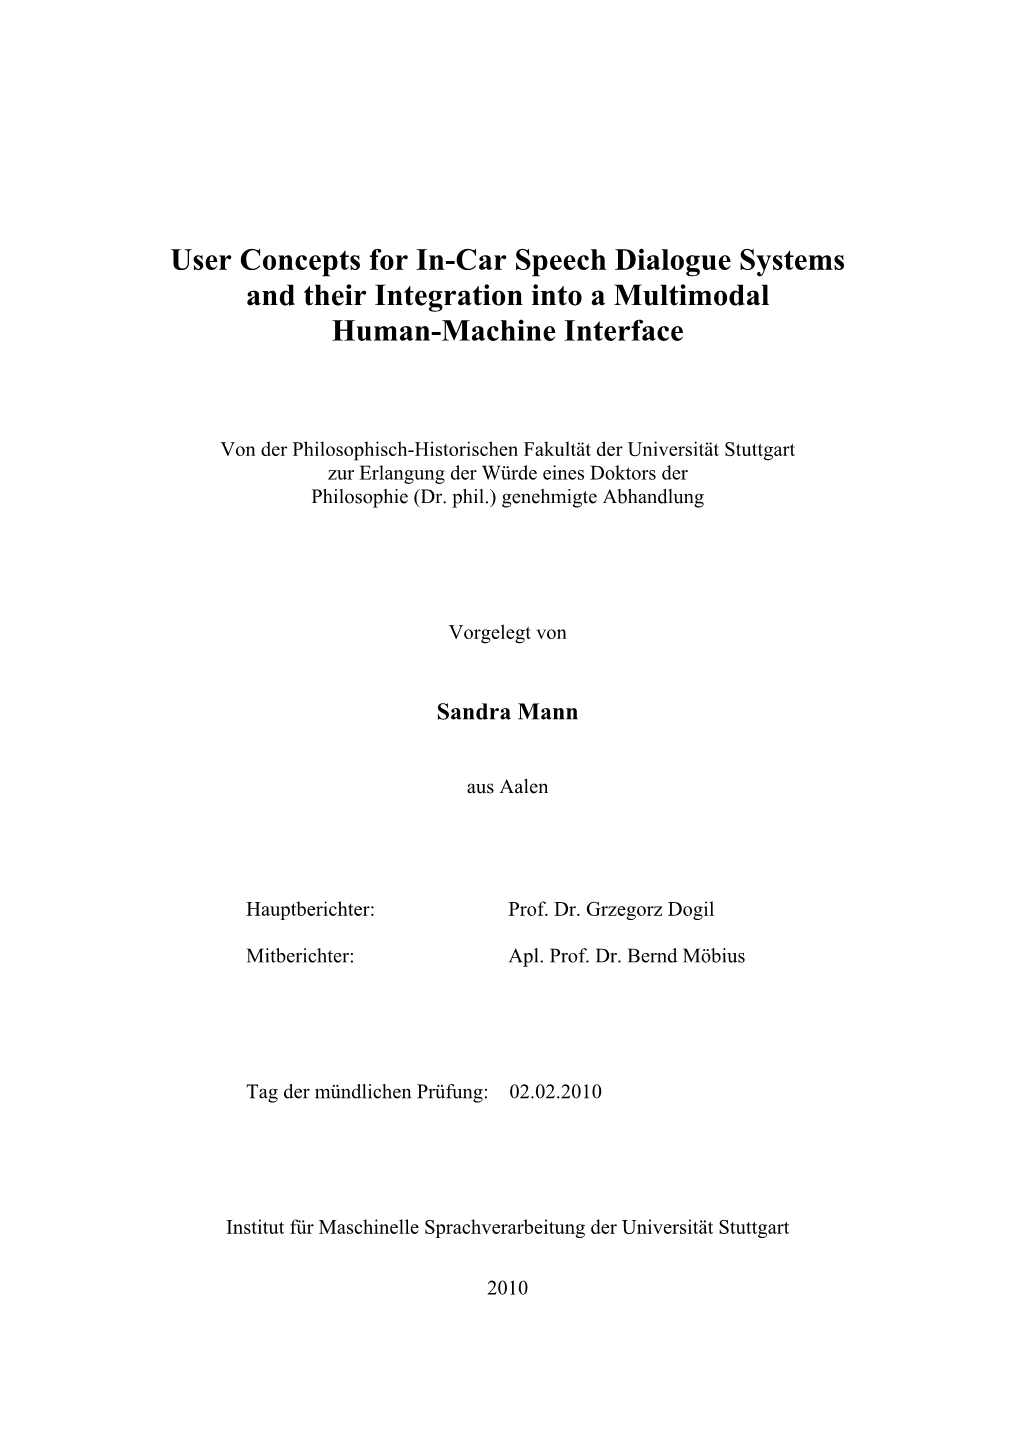 User Concepts for In-Car Speech Dialogue Systems and Their Integration Into a Multimodal Human-Machine Interface